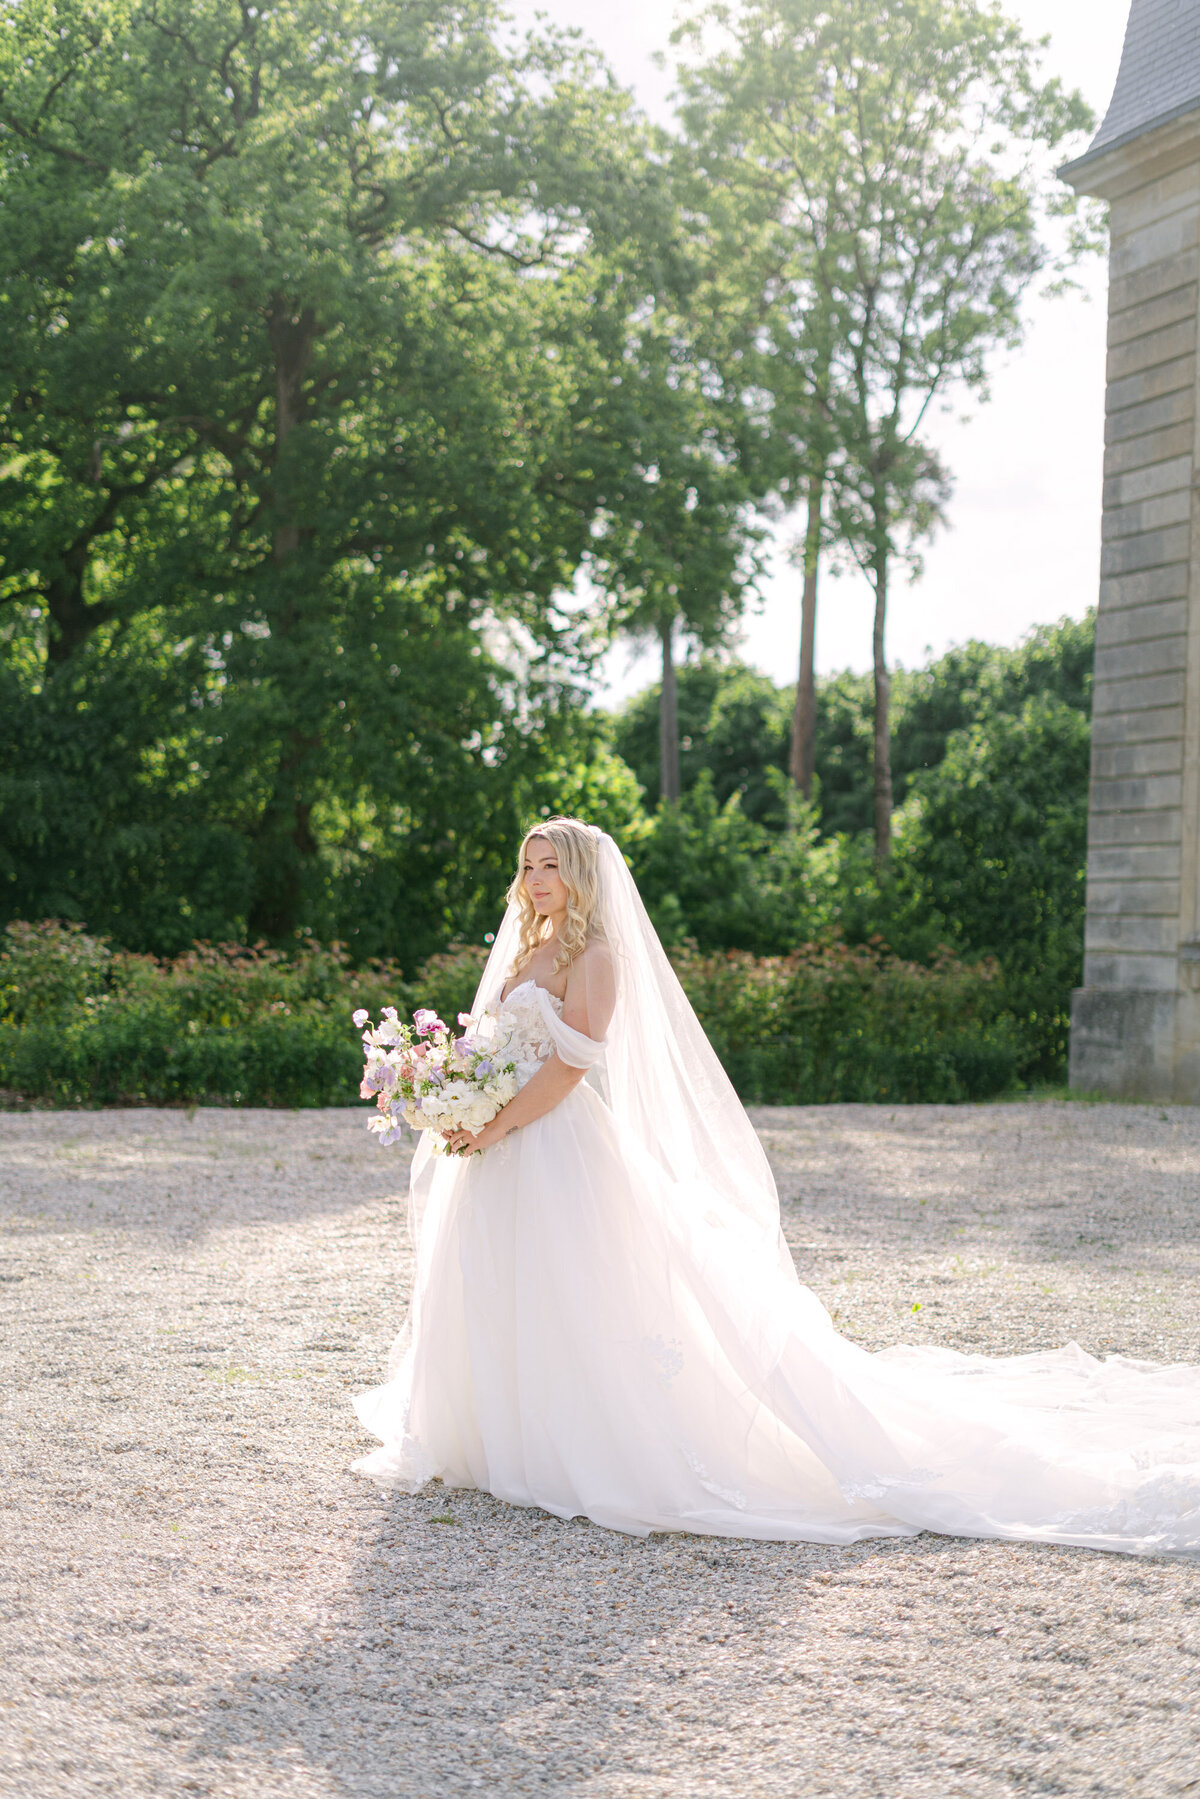 French Castle Wedding - Justine Berges-181